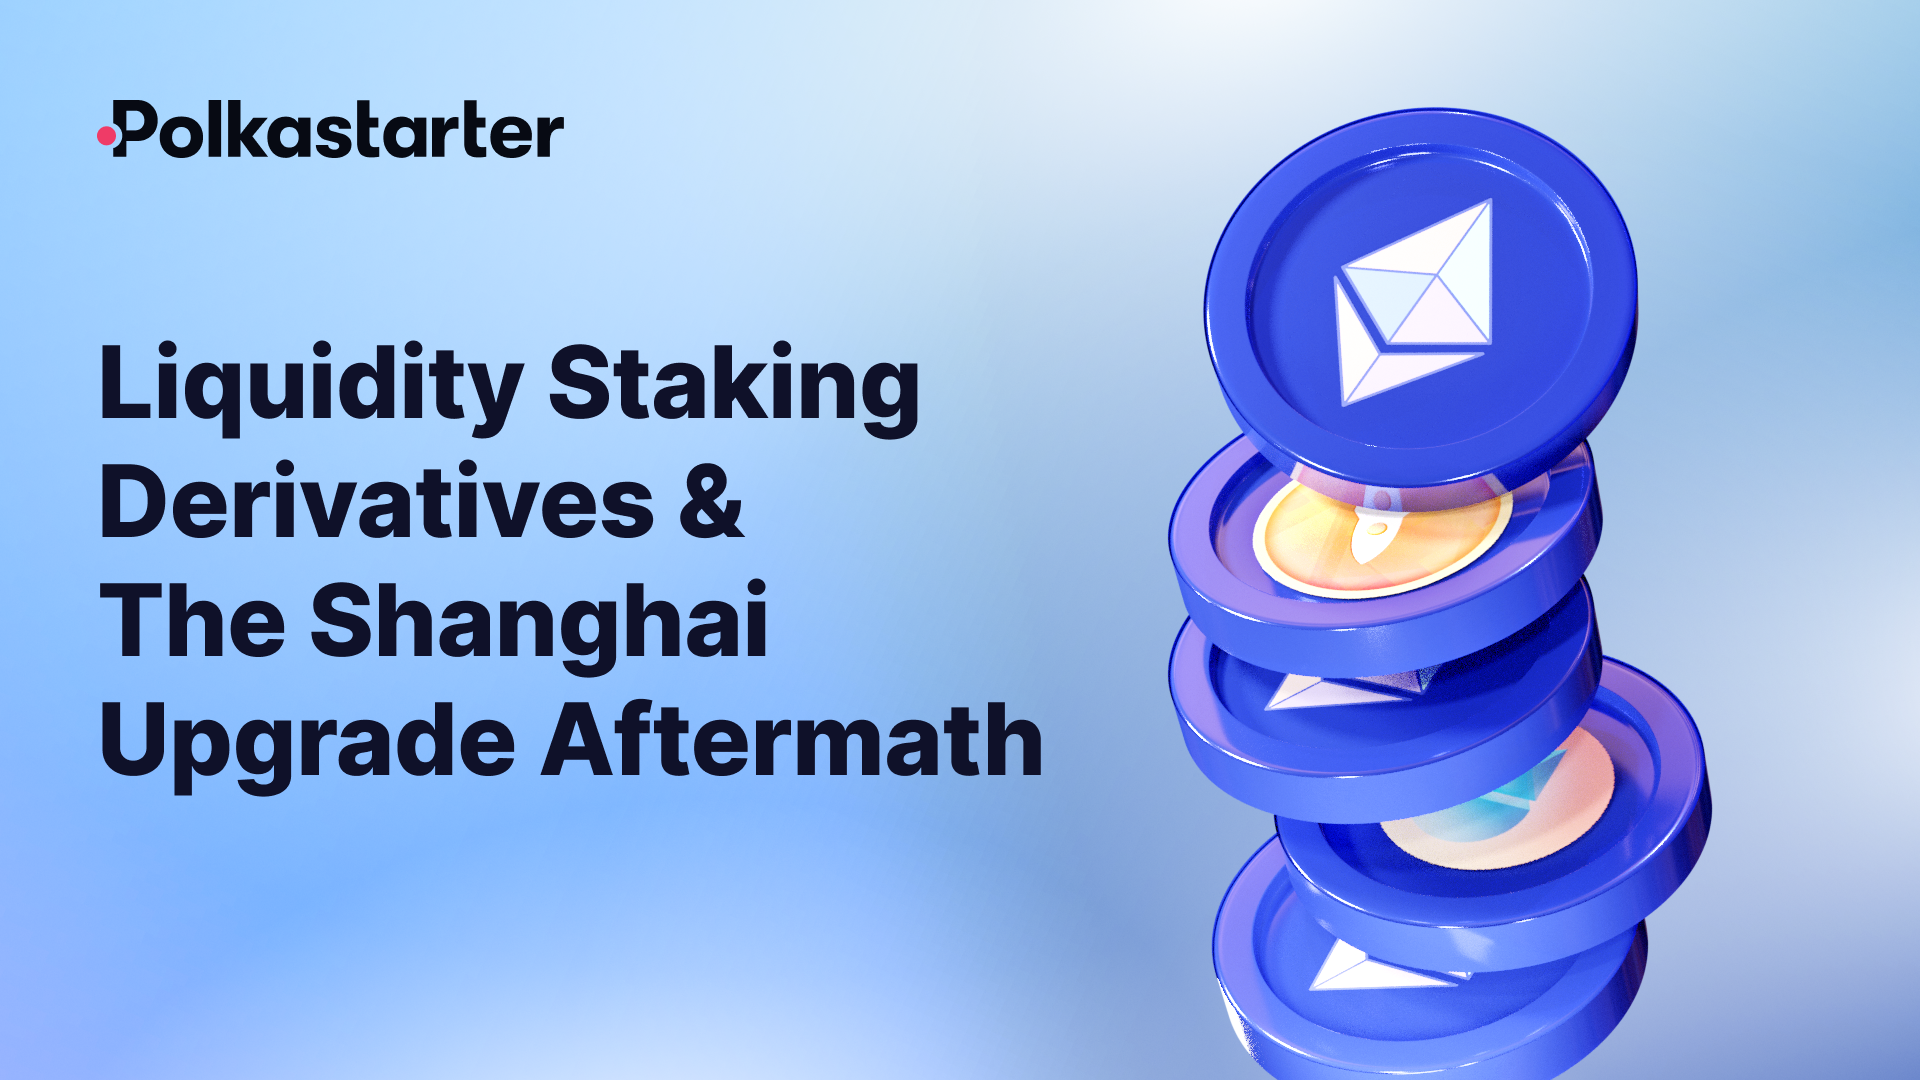 Liquidity Staking Derivatives & The Shanghai Upgrade Aftermath